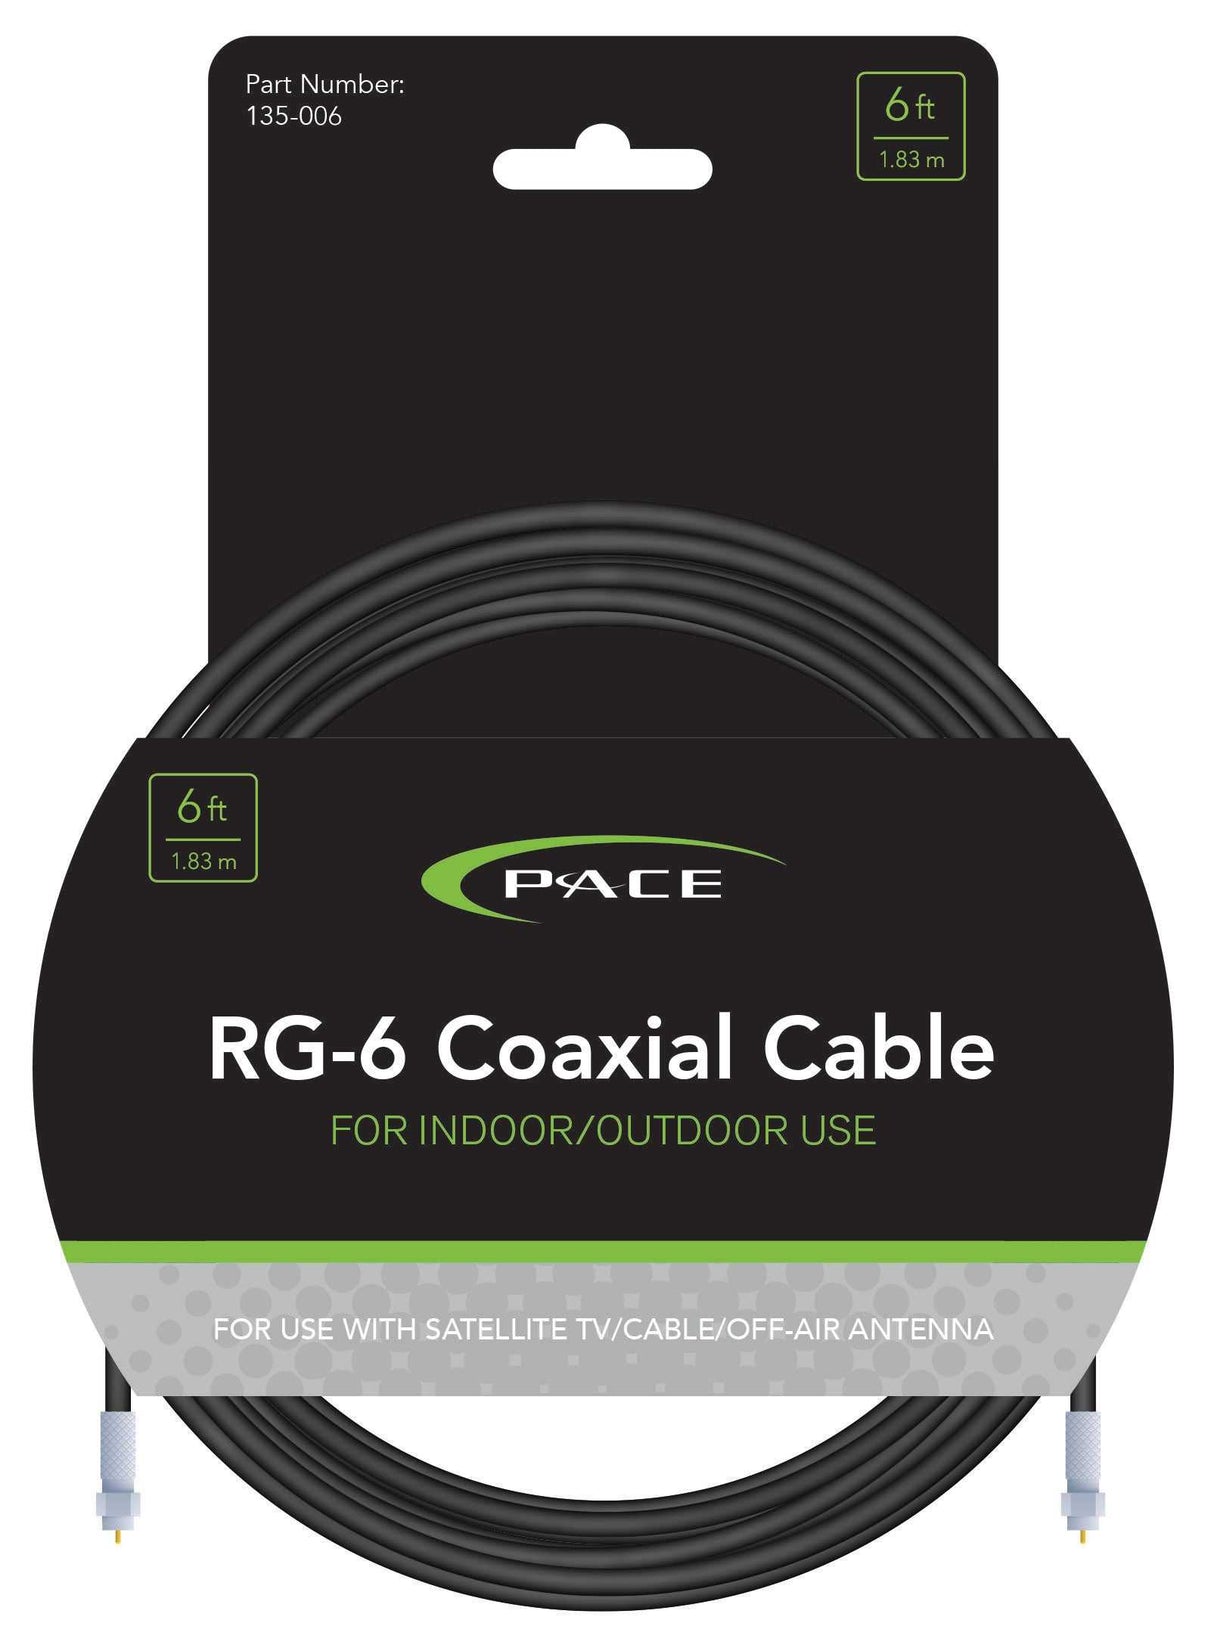 135-006 Coaxial Cable